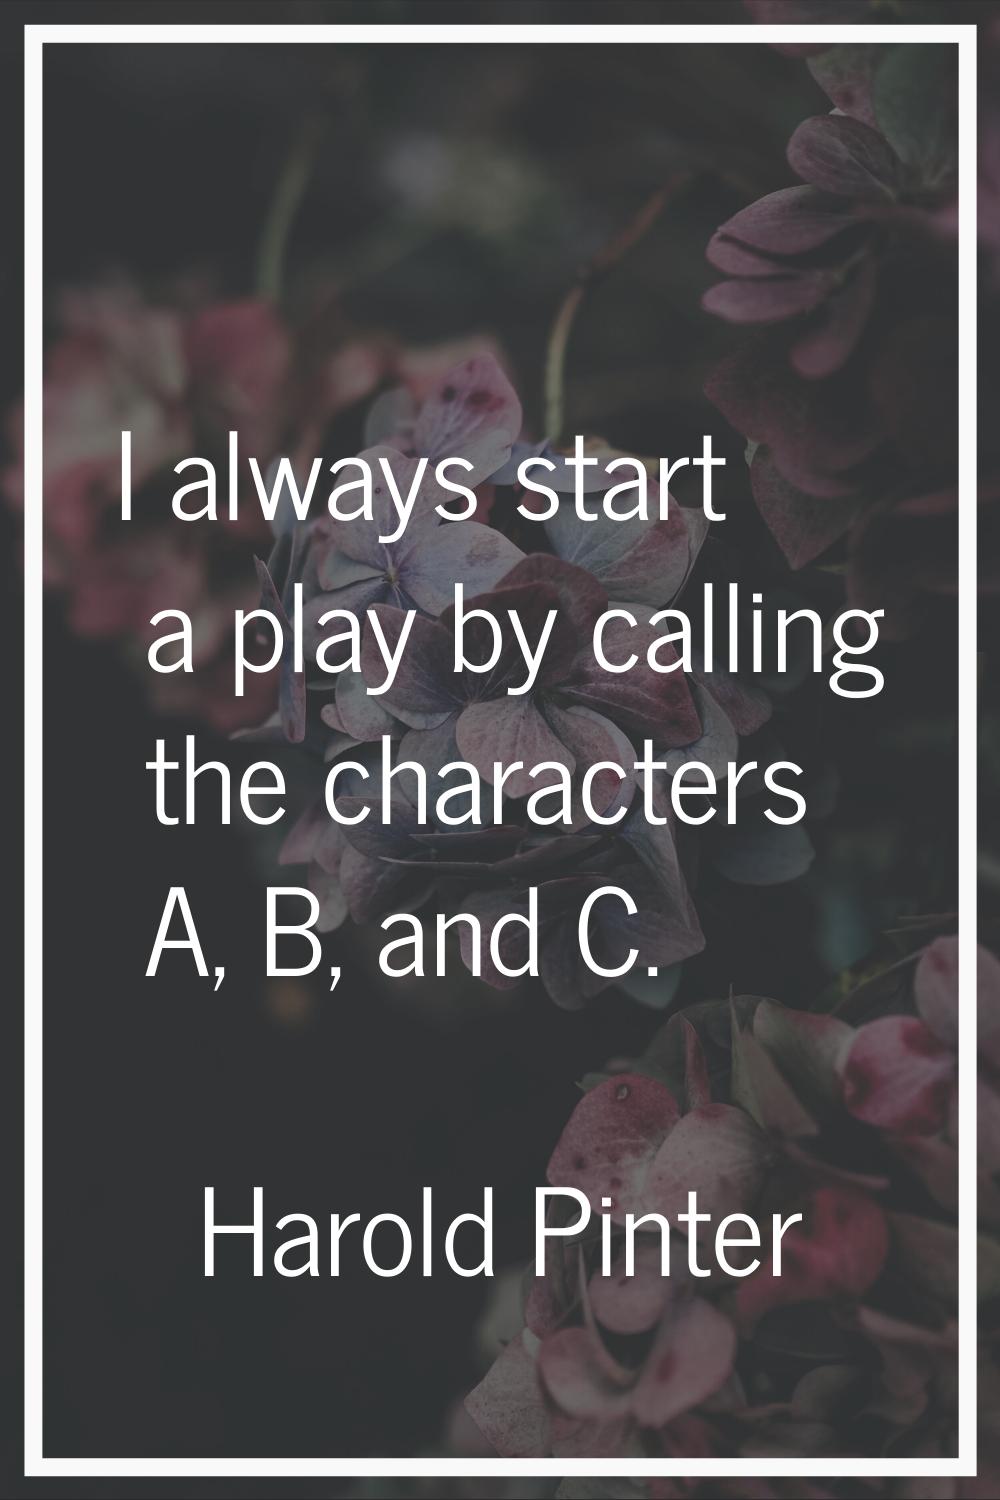 I always start a play by calling the characters A, B, and C.